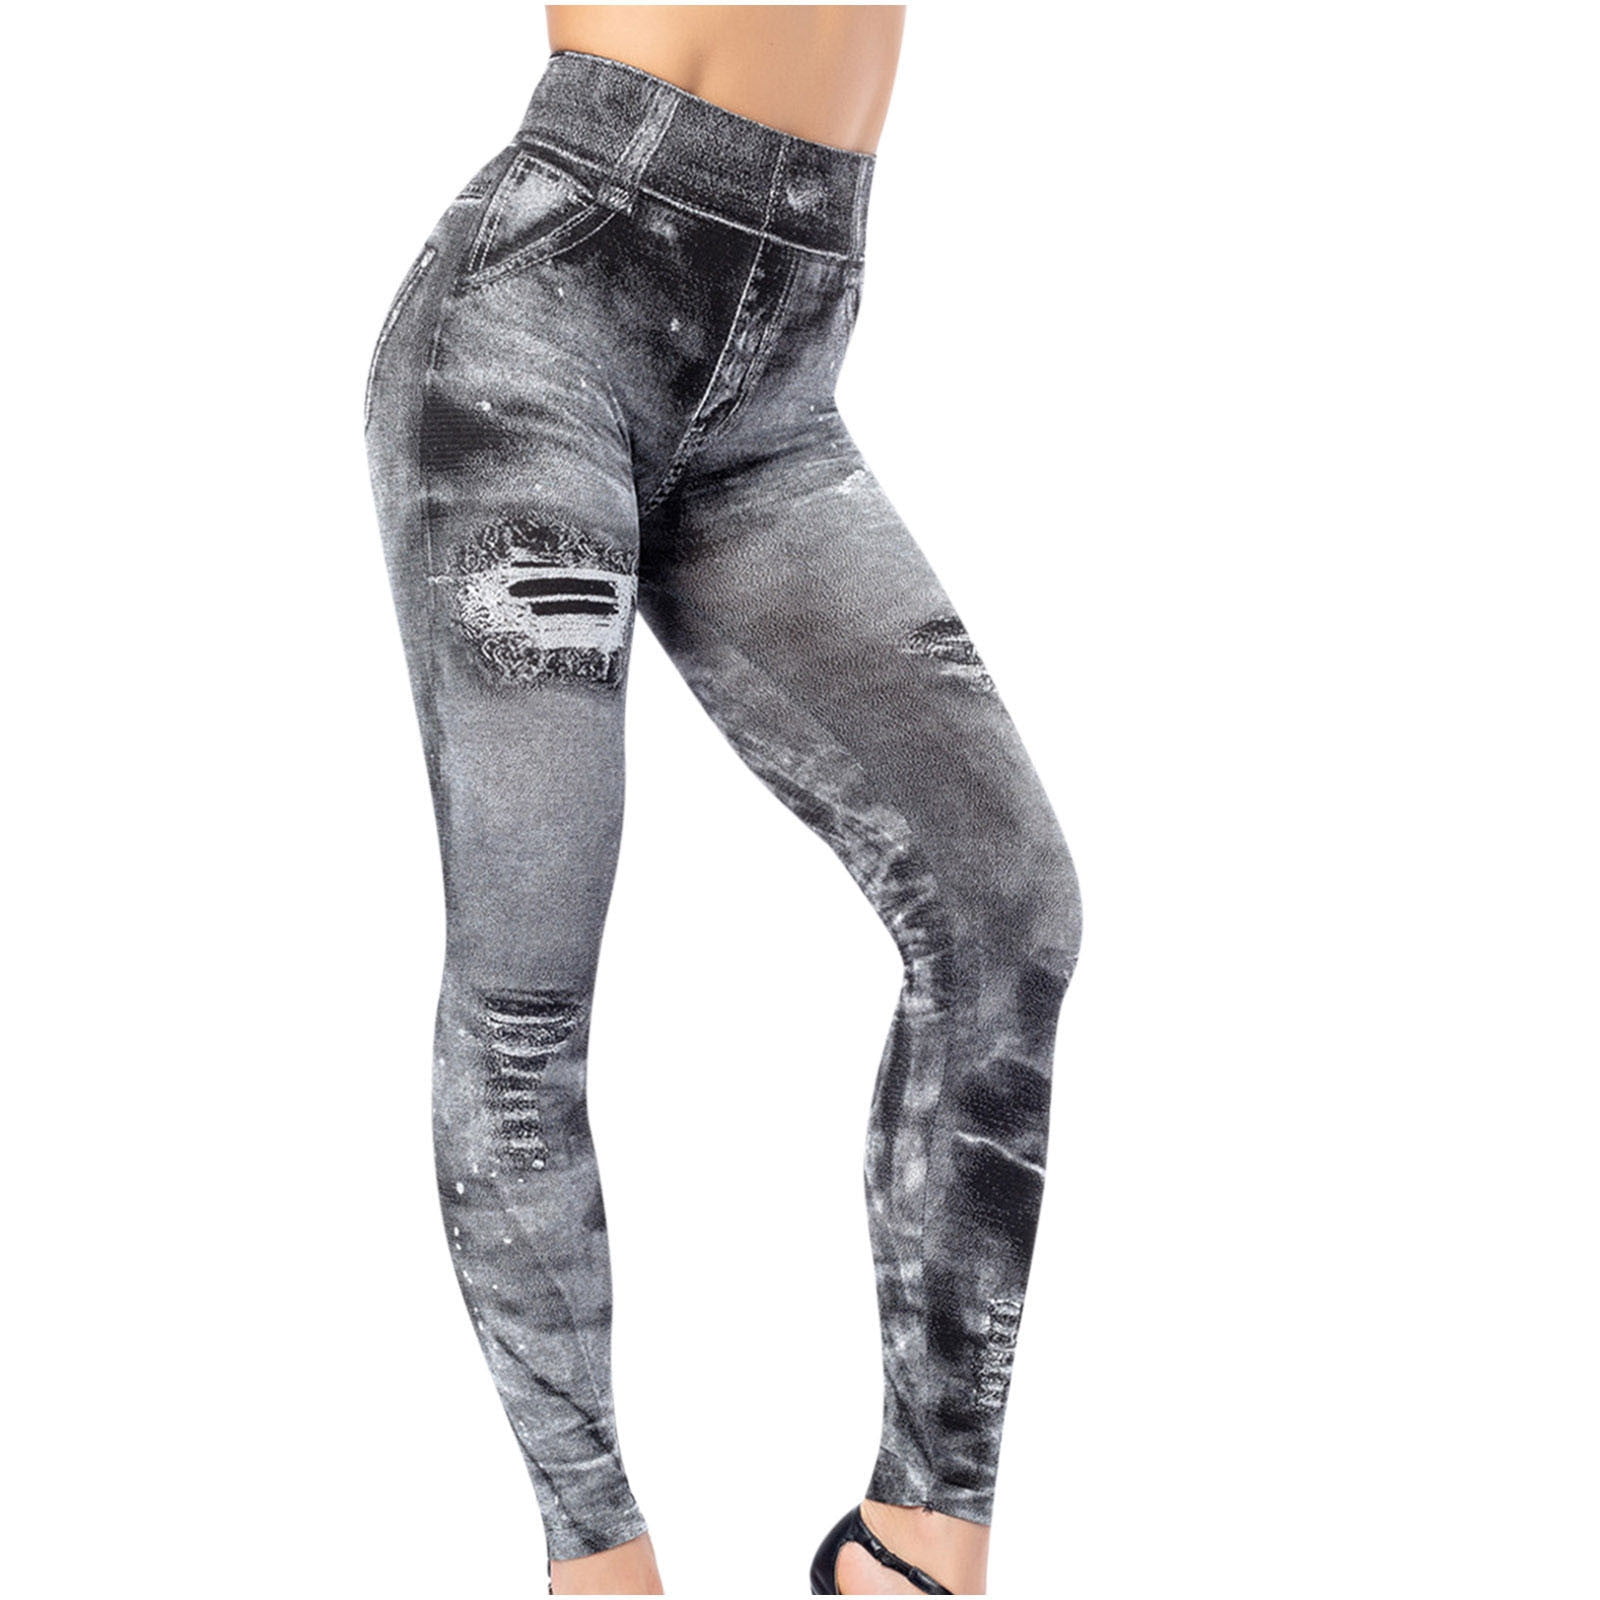 YYDGH Women's Ripped Jeans Stretchy High Waisted Jeans Split Hem Straight  Denim Pants Gray S